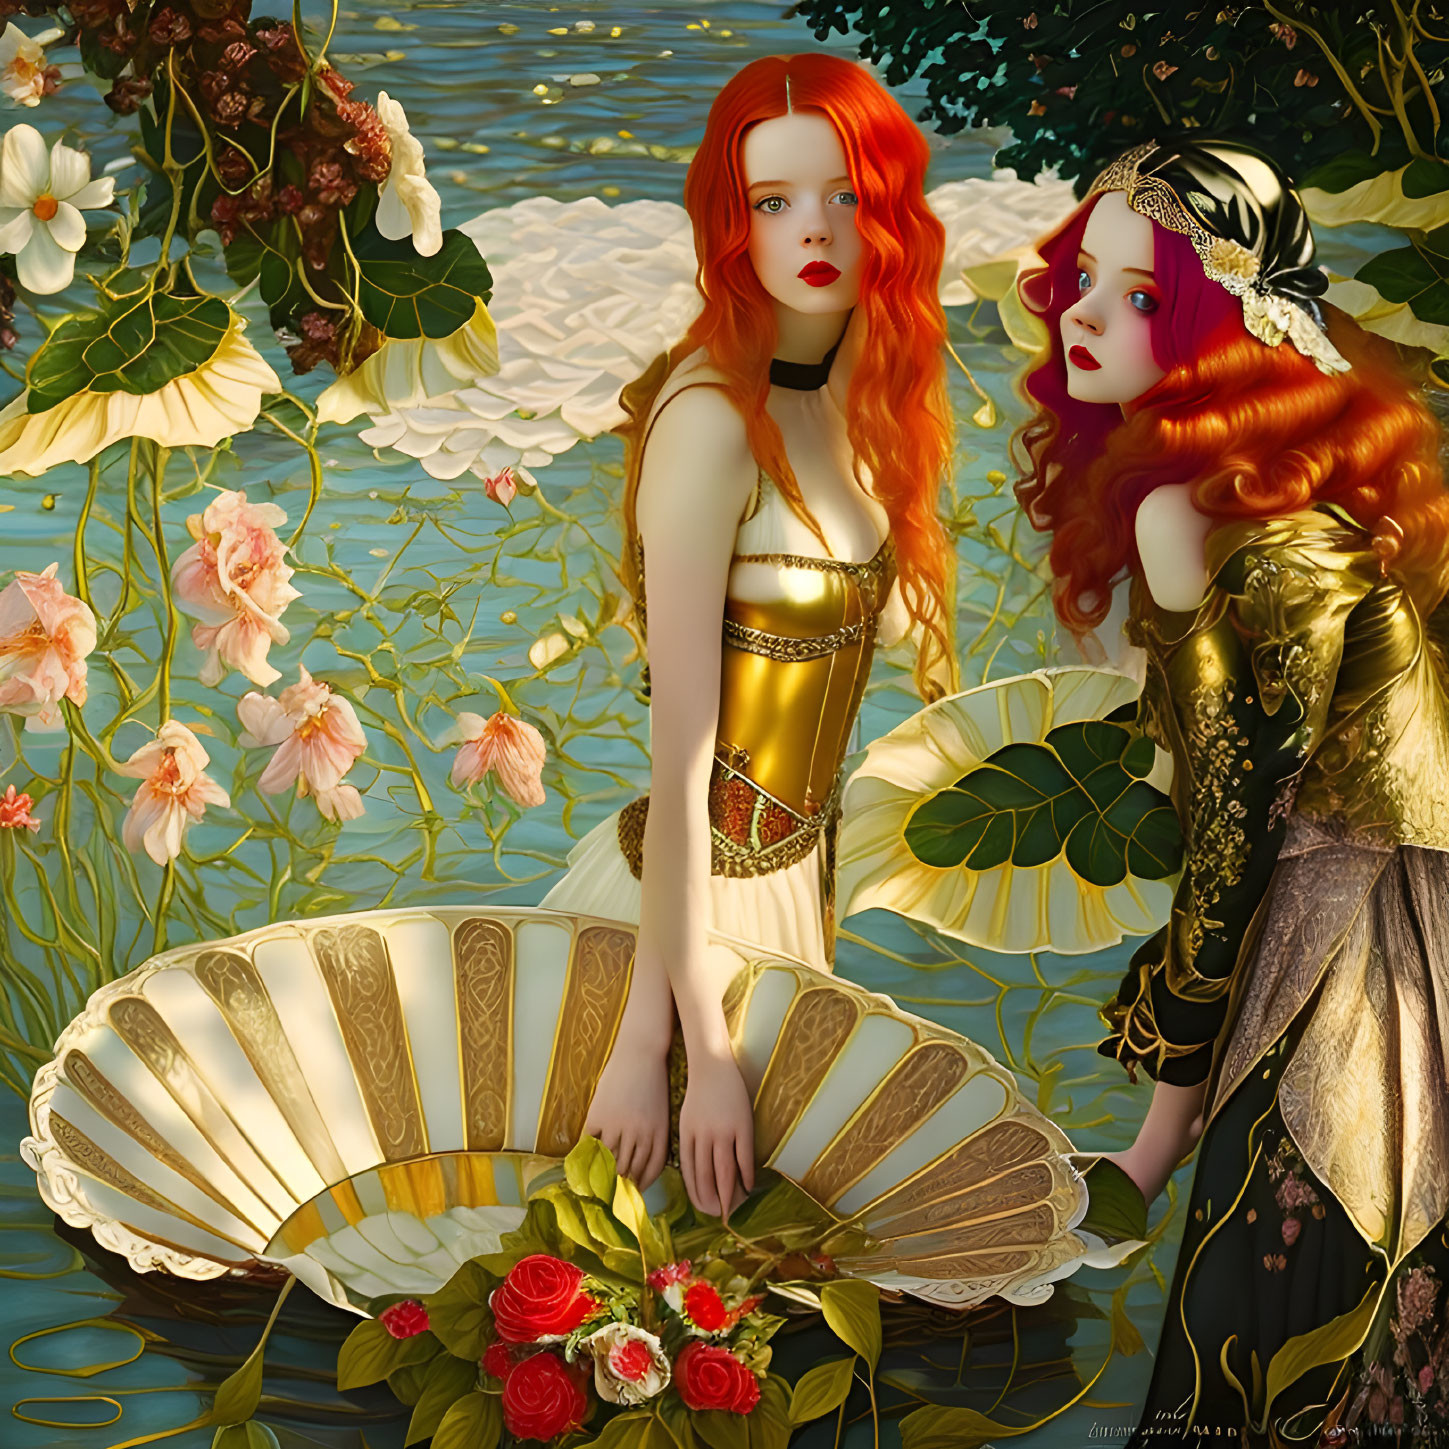 Ethereal women with fiery red hair in golden dresses by water with lilies